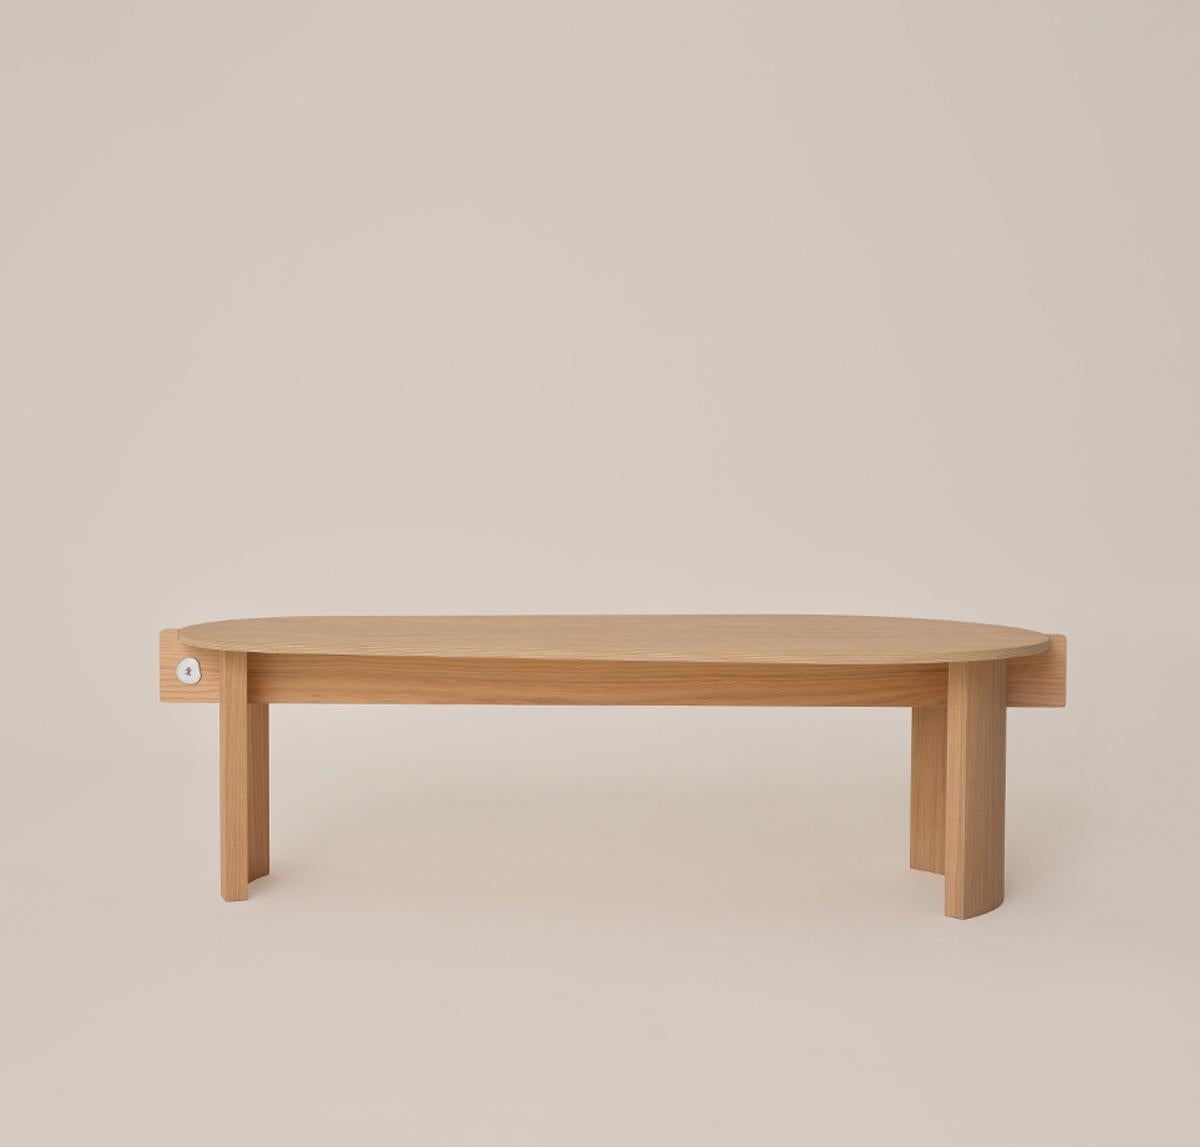 KITA LIVING Flow Coffee Table Medium - Oak Wood In New Condition For Sale In Bomonti, TR